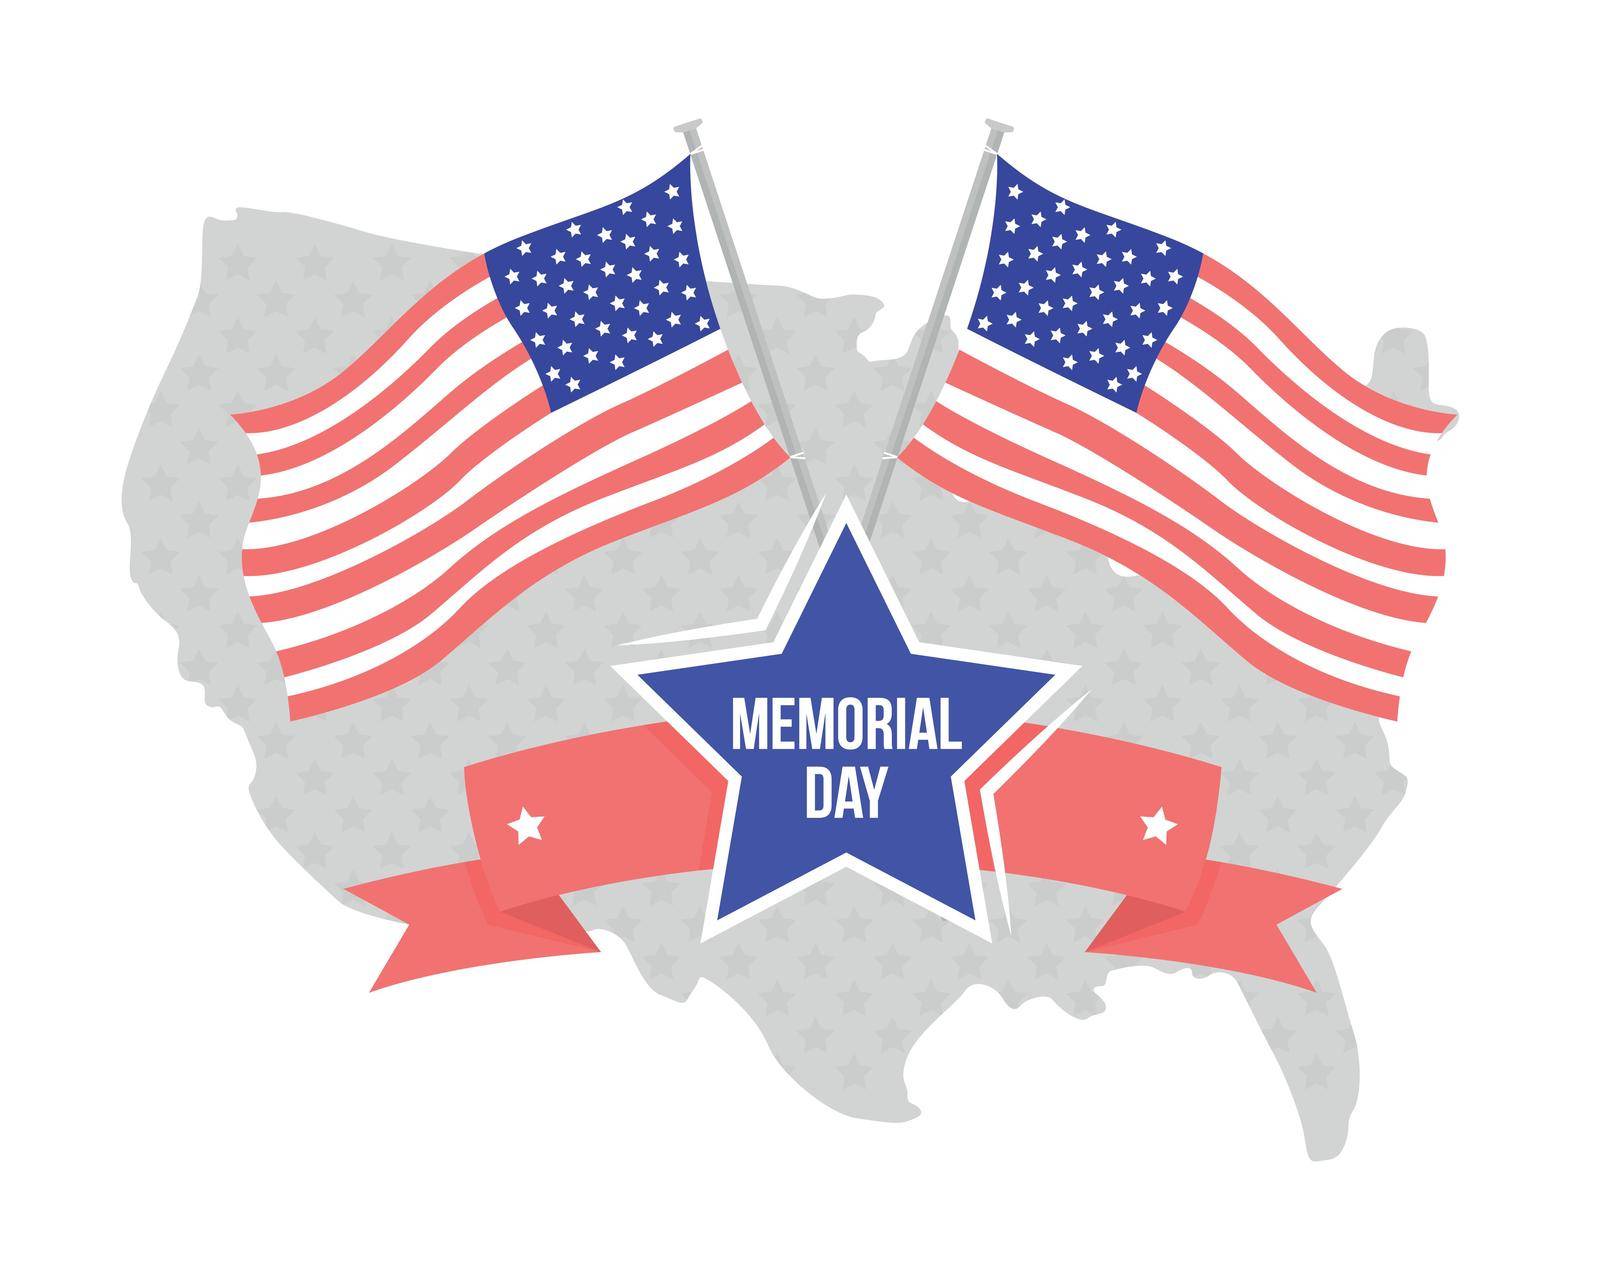 Memorial day 2D vector isolated illustration. Map of USA and flags flat objects on cartoon background. Honor of fallen soldiers colourful scene for mobile, website, presentation. Bebas Neue font used